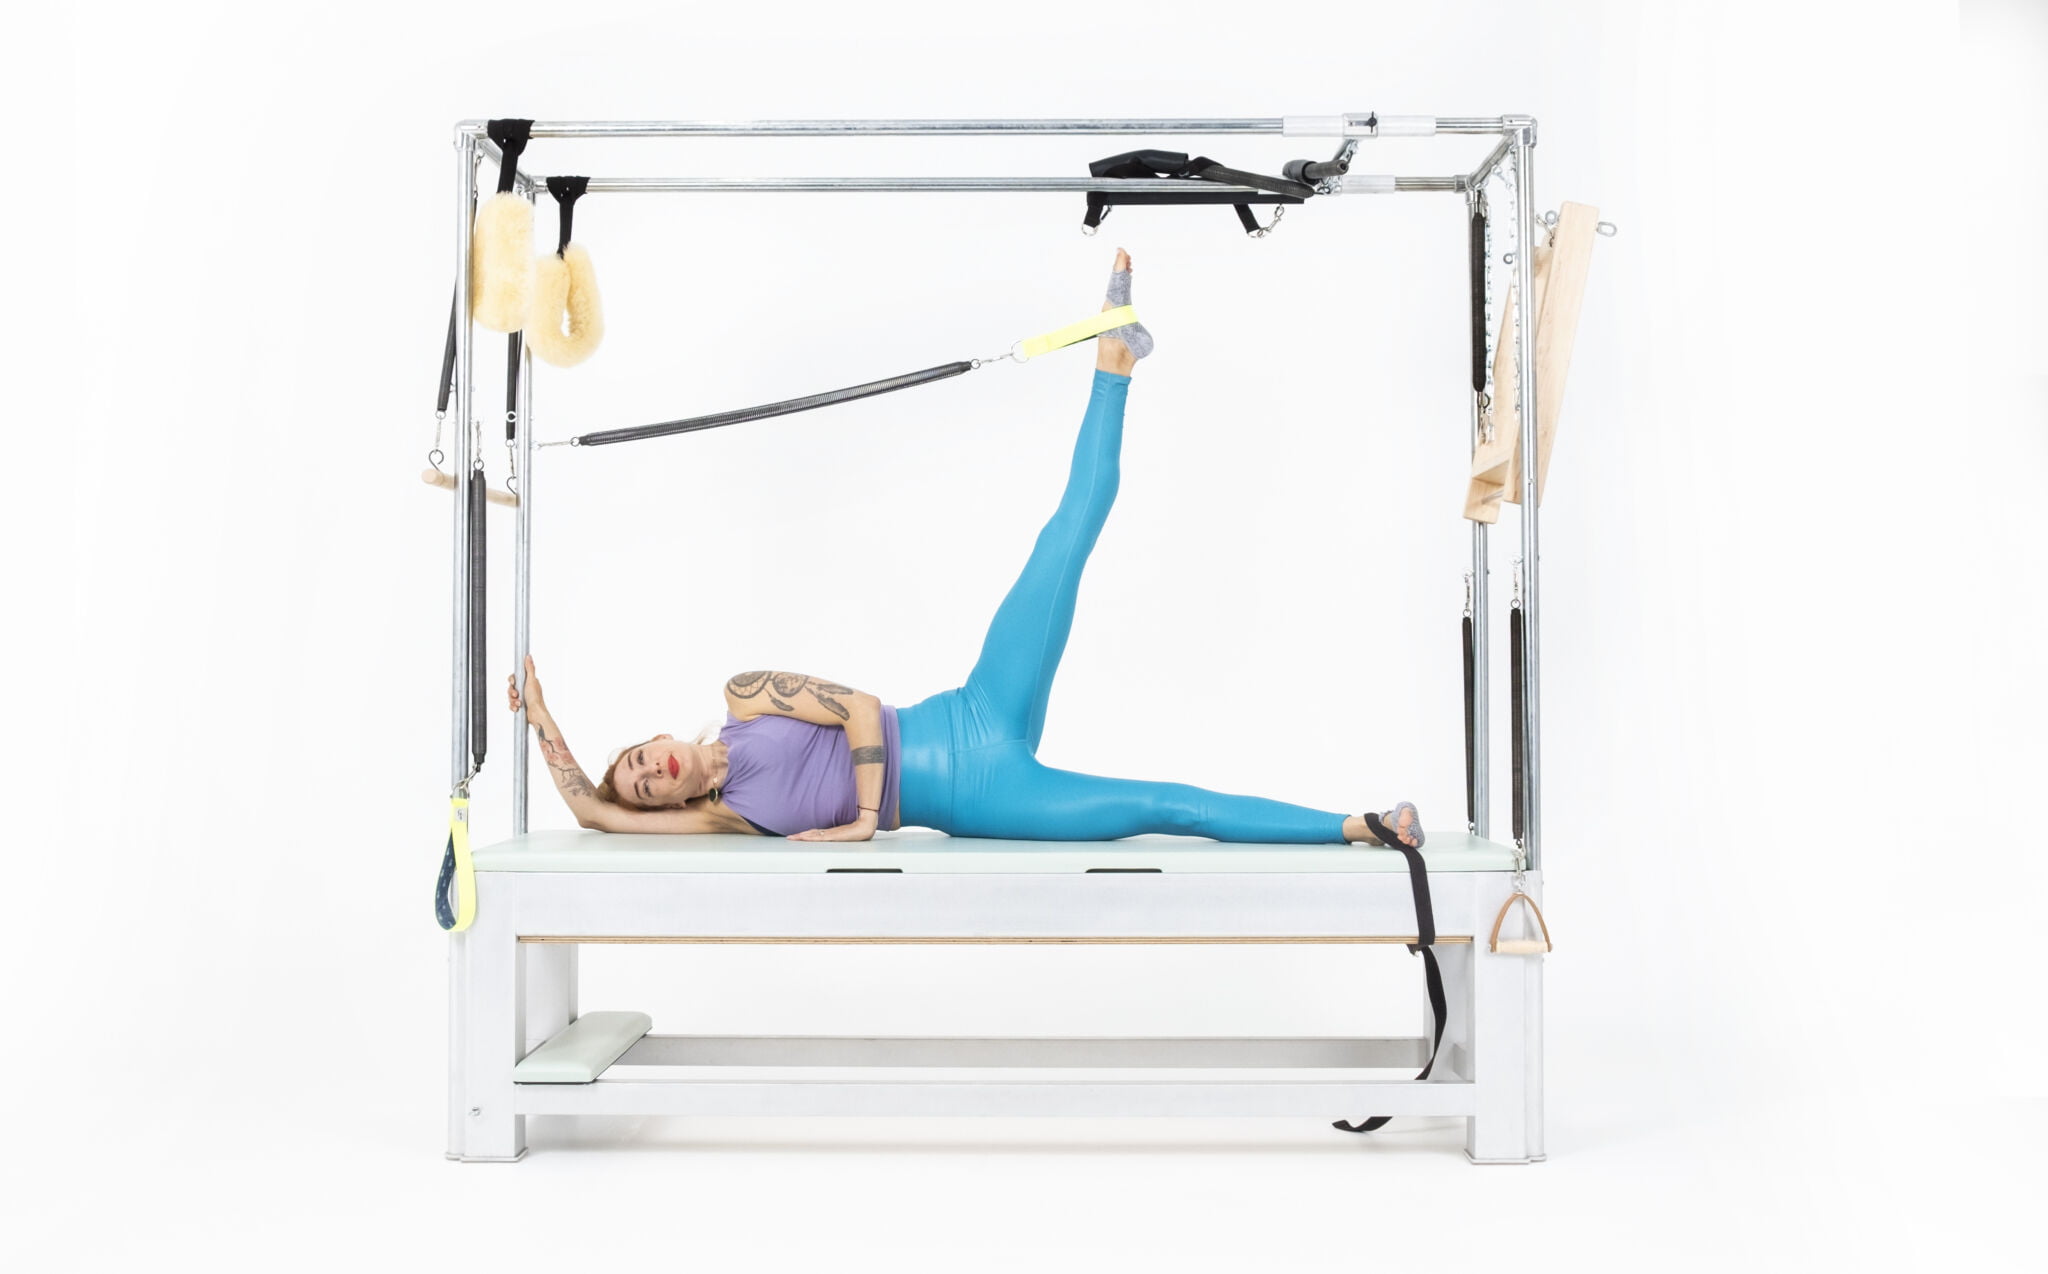 Side-Leg-Springs-Up-Down-on-the-Cadillac-or-Tower-Online-Pilates-Classes-scaled